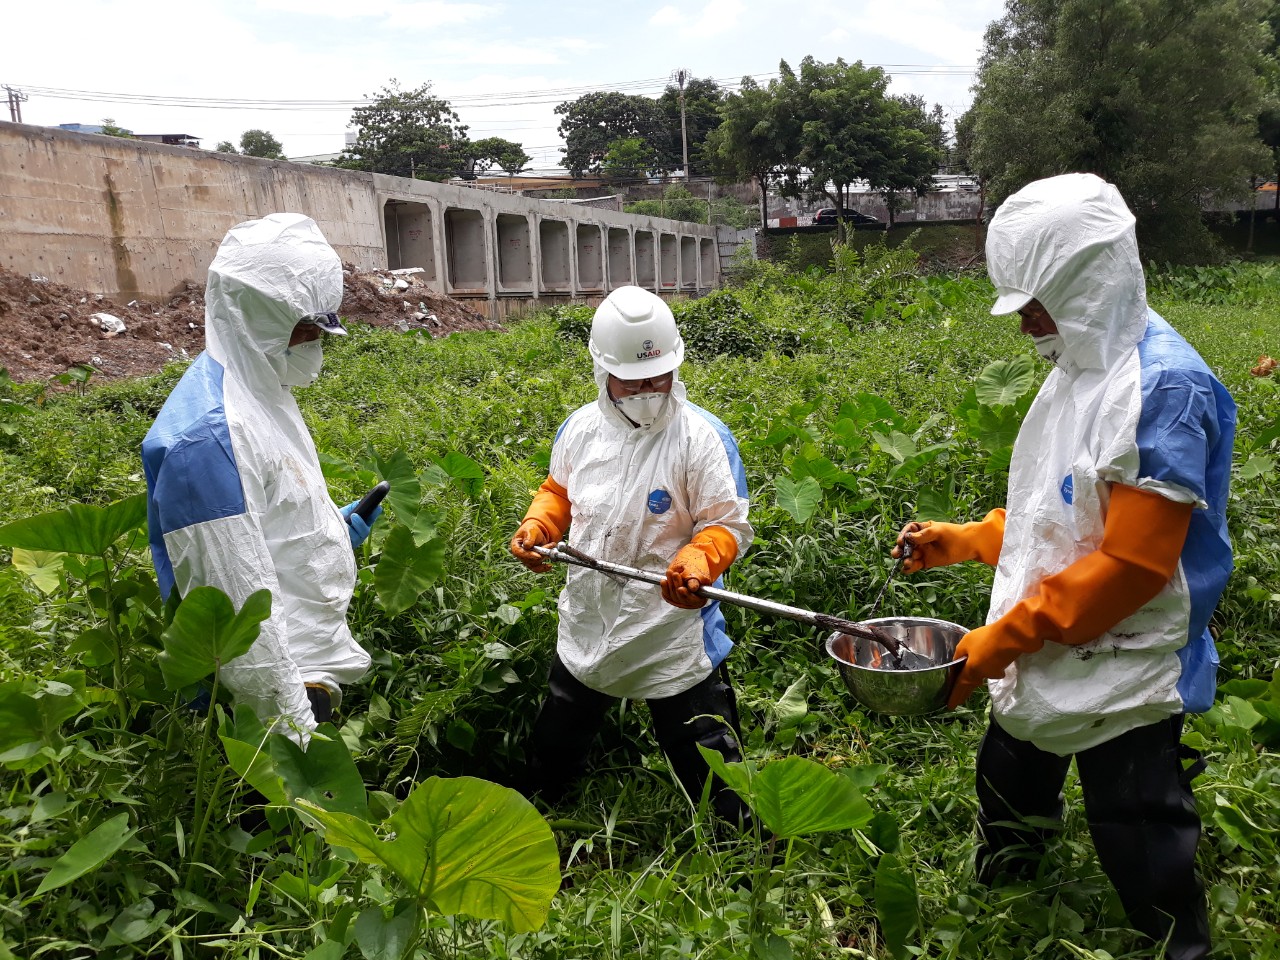 A group of people in white protective suits in a field

Description automatically generated